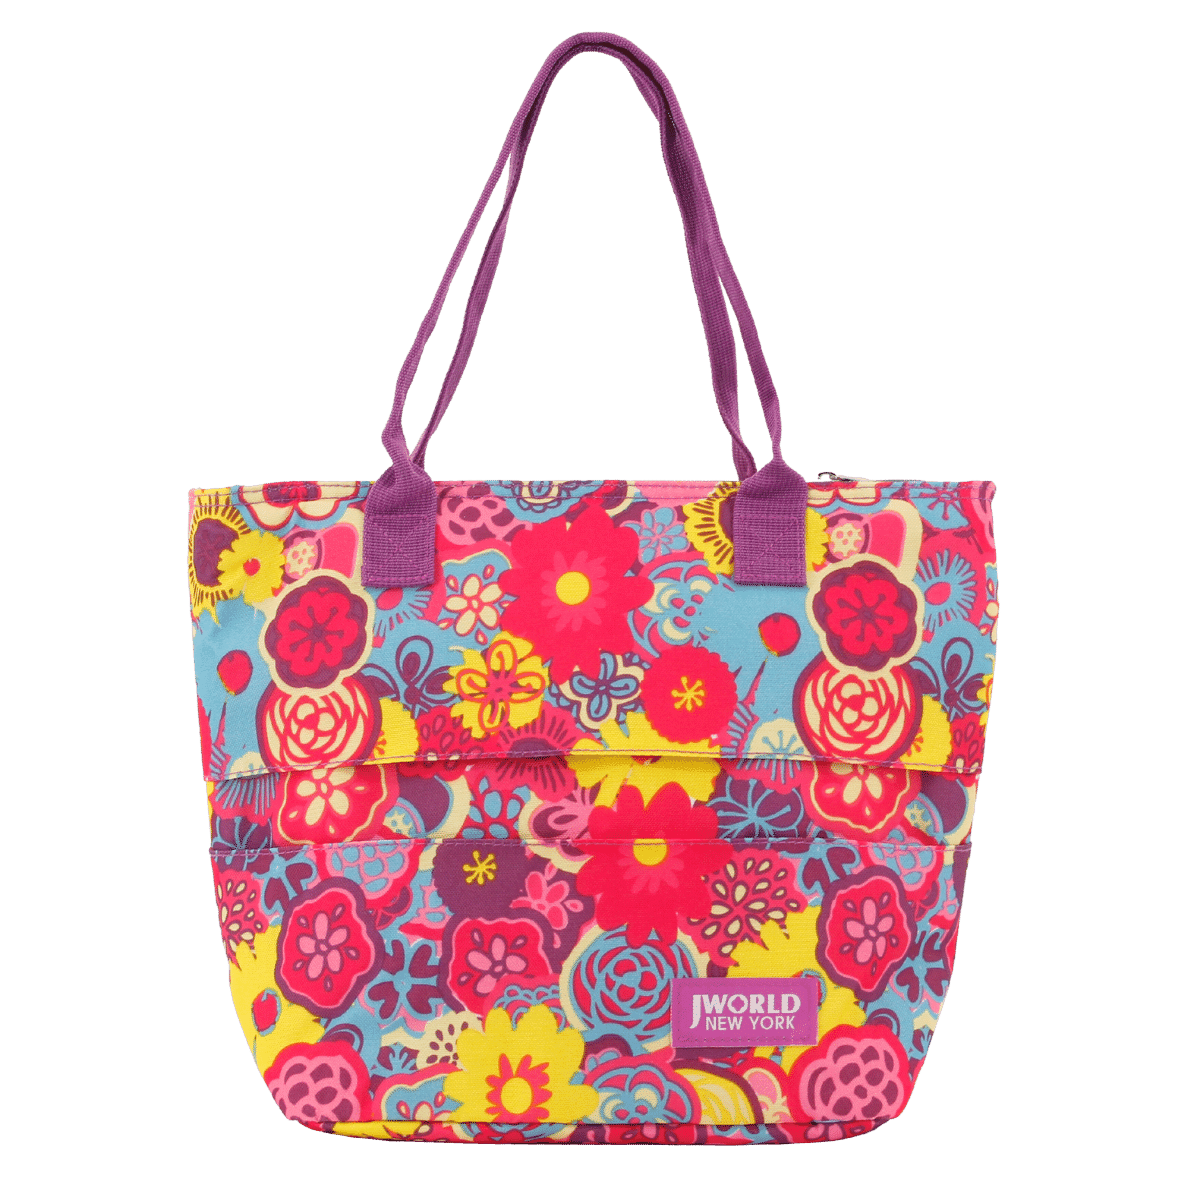 Lola Insulated Lunch Tote Bag - On Sale - JWorldstore